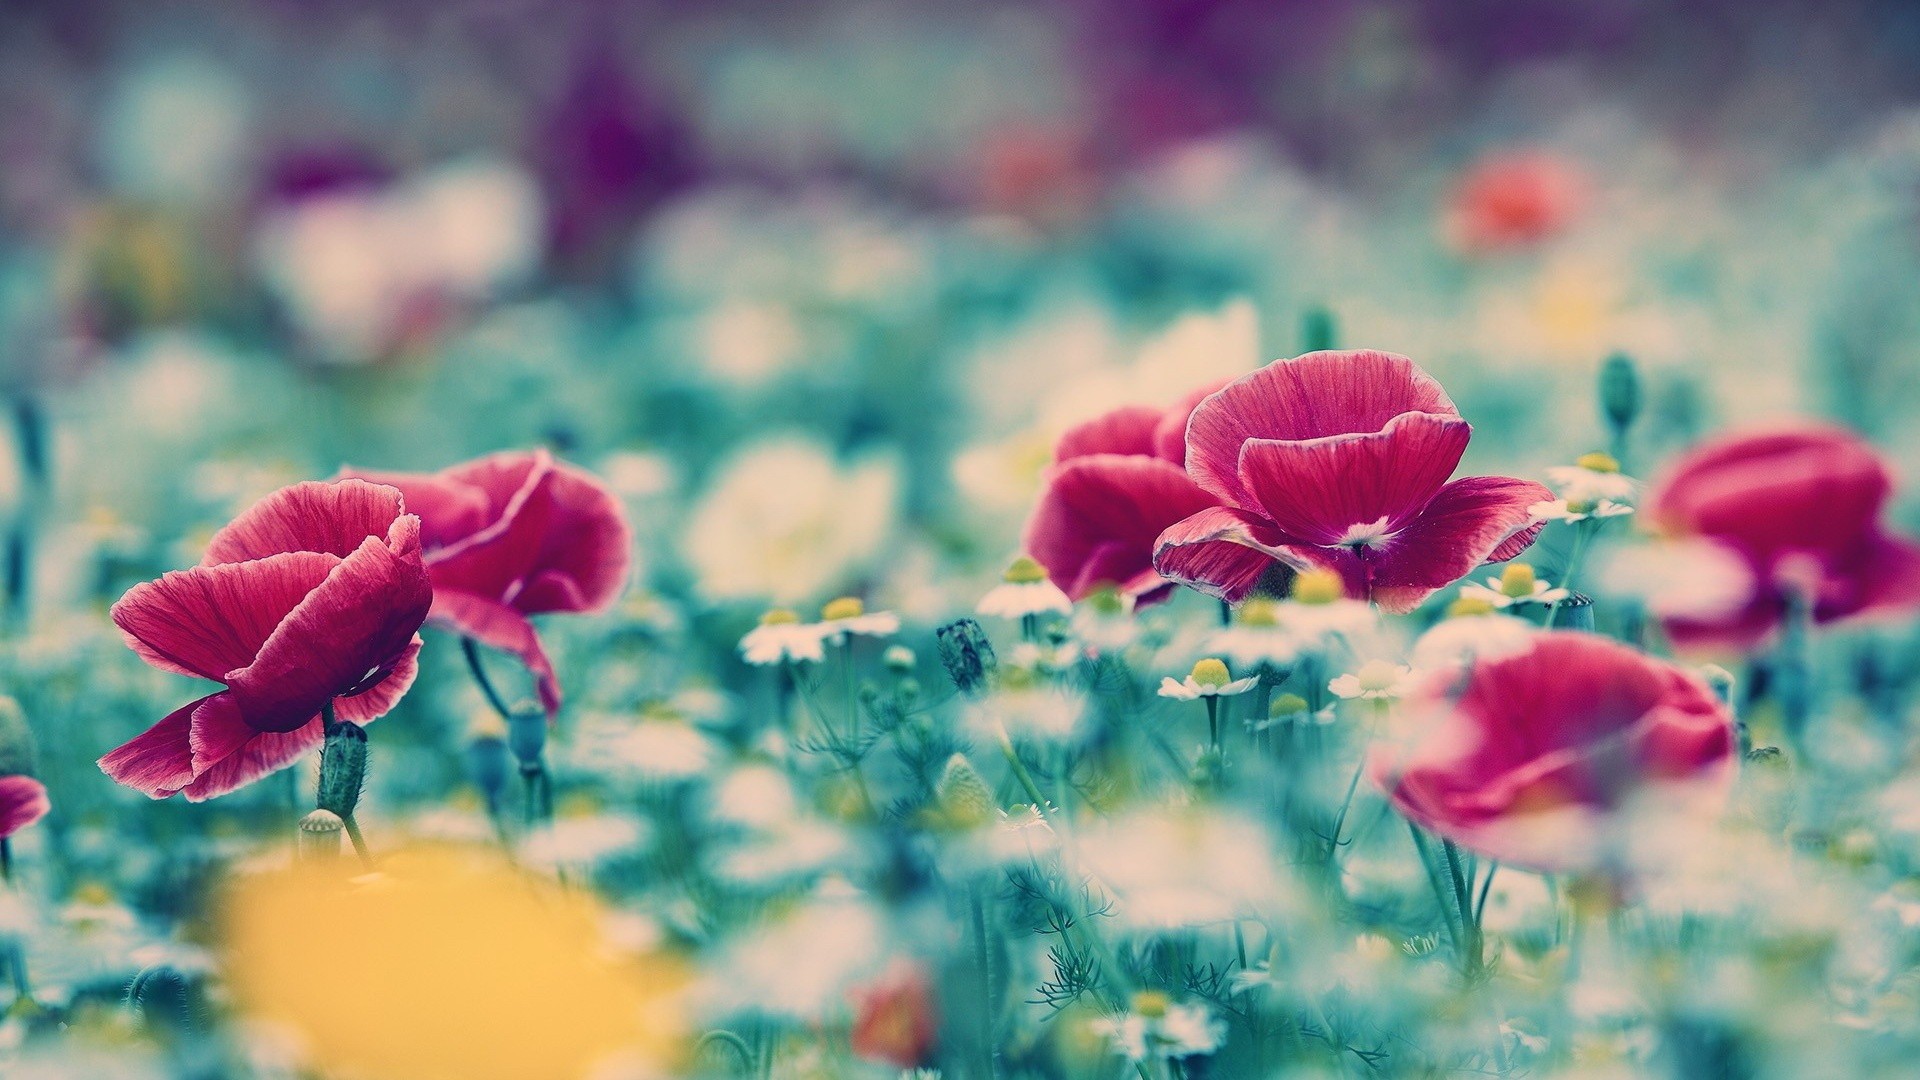 General 1920x1080 flowers poppies plants colorful